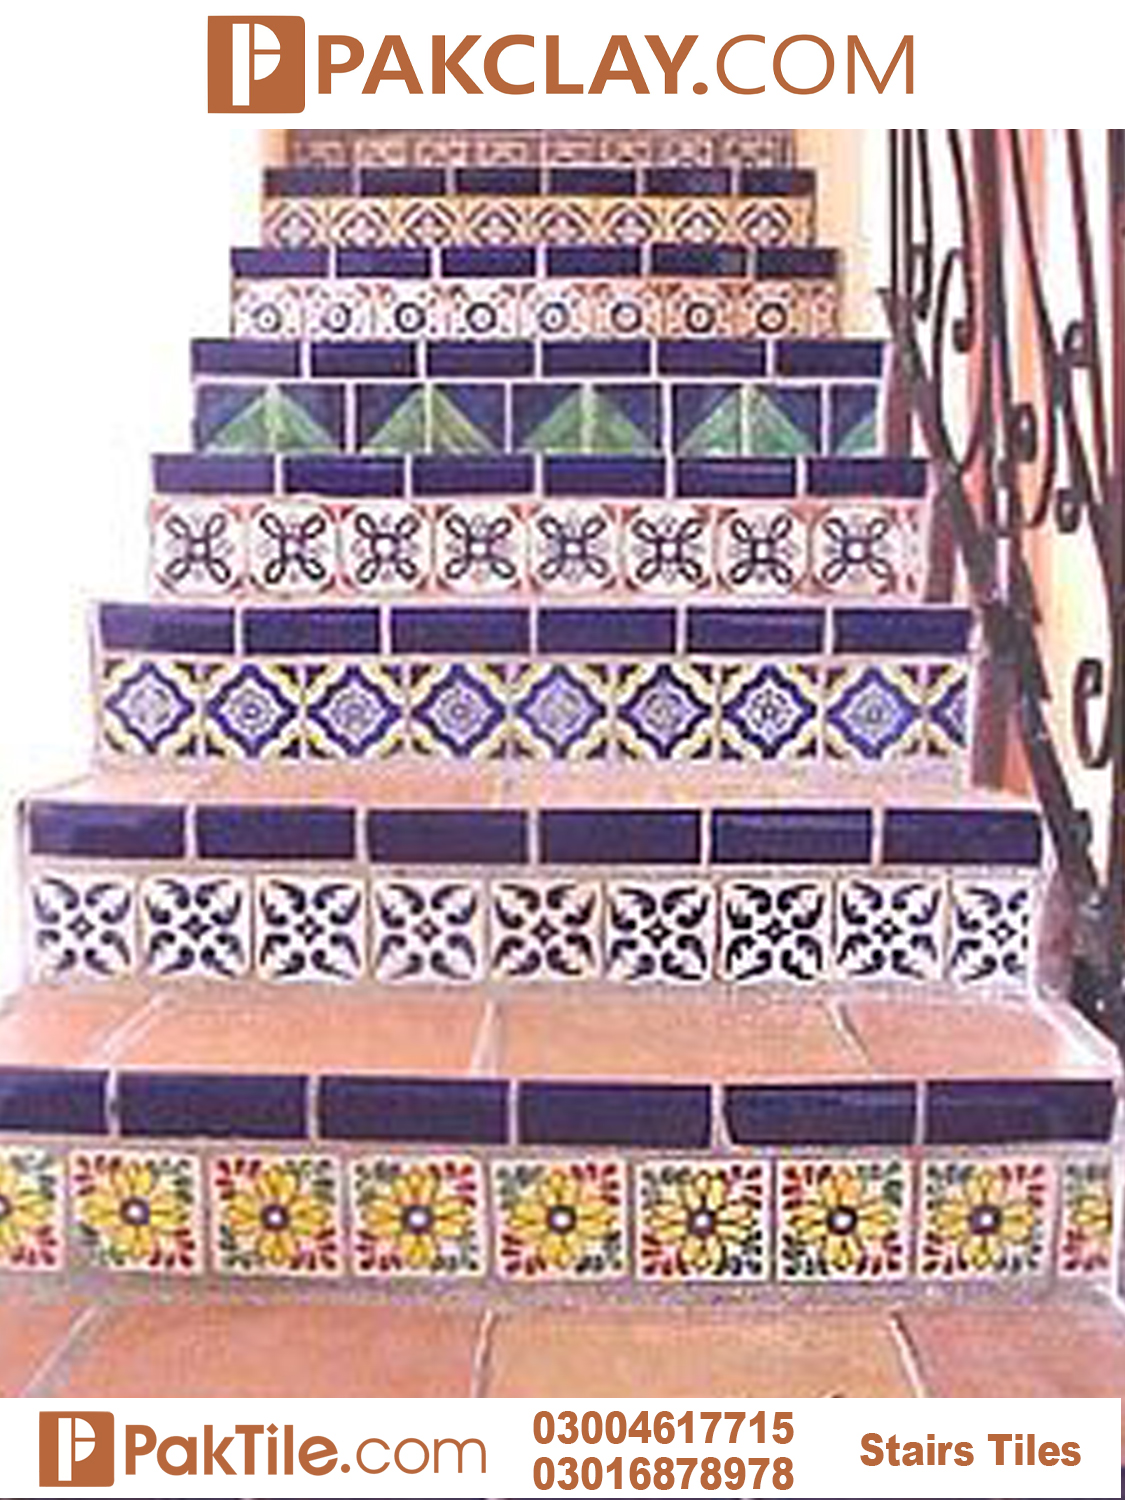 10 Hand Painted Staircase Tiles Design in Multan